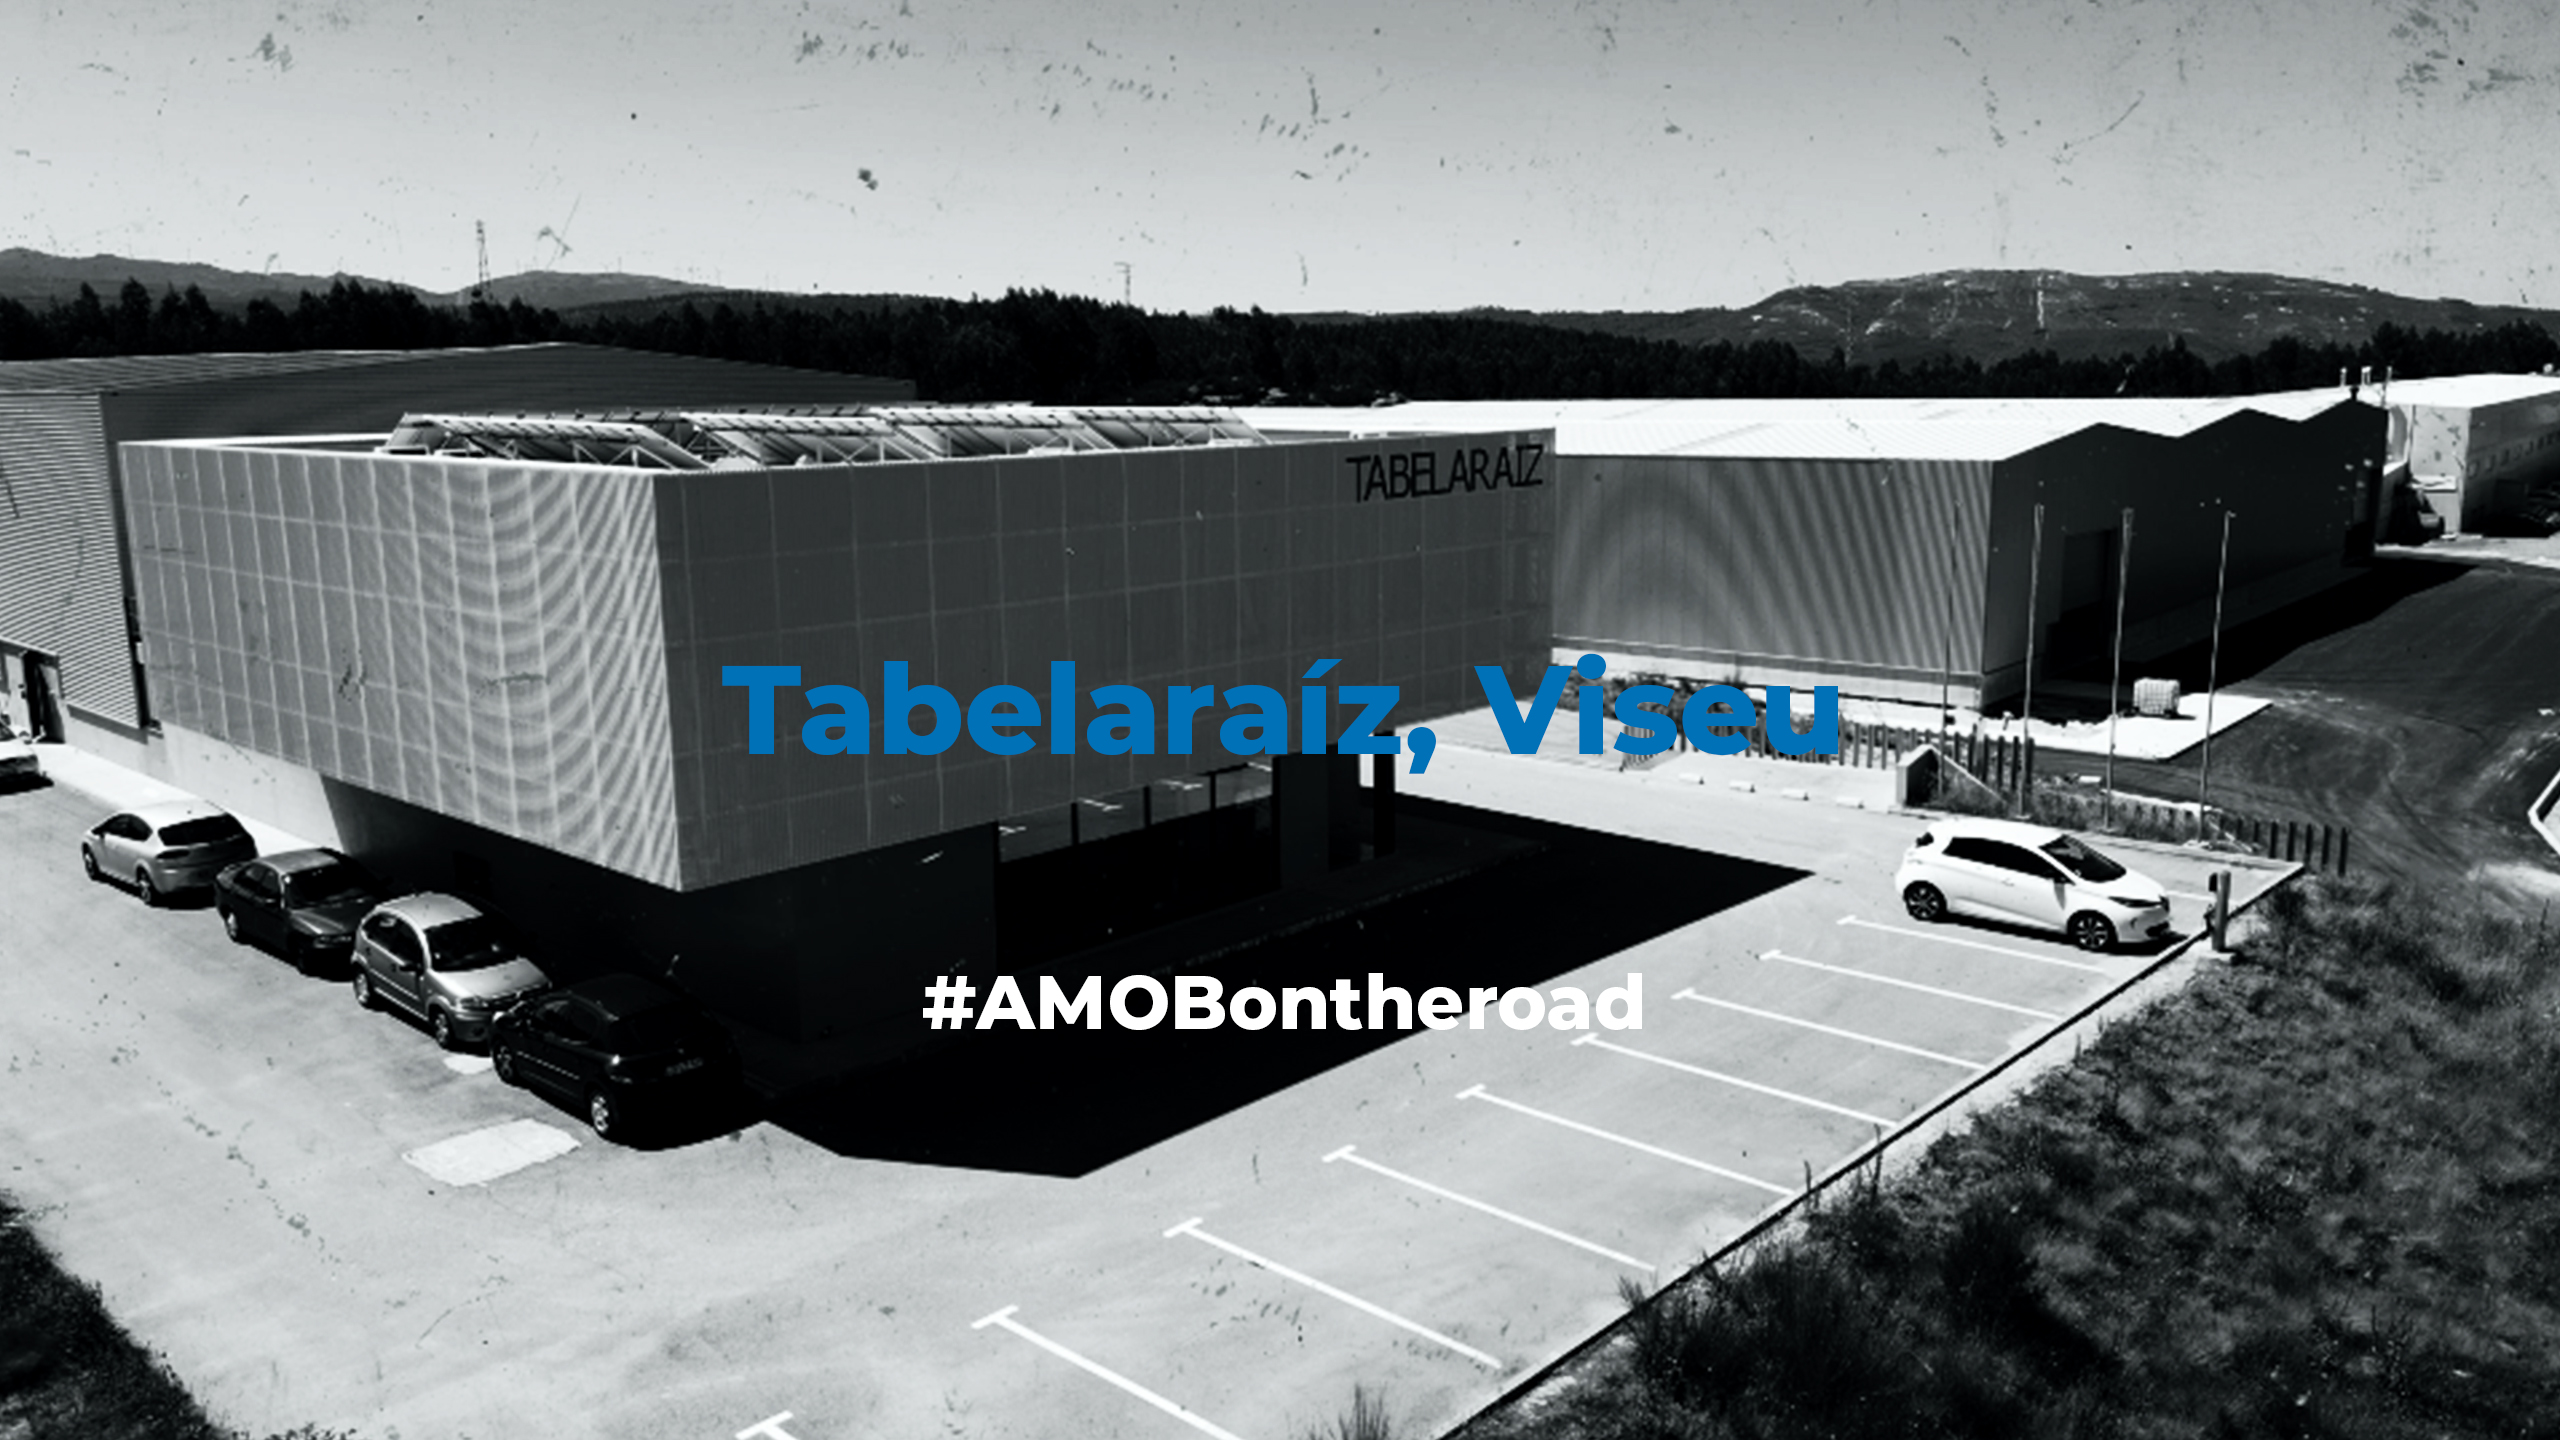 Welcome to AMOB Group | Tube Bending Machines, End Forming.. - Based in Viseu, Tabelaraíz strengthens its productivity with a new AMOB roll forming line.